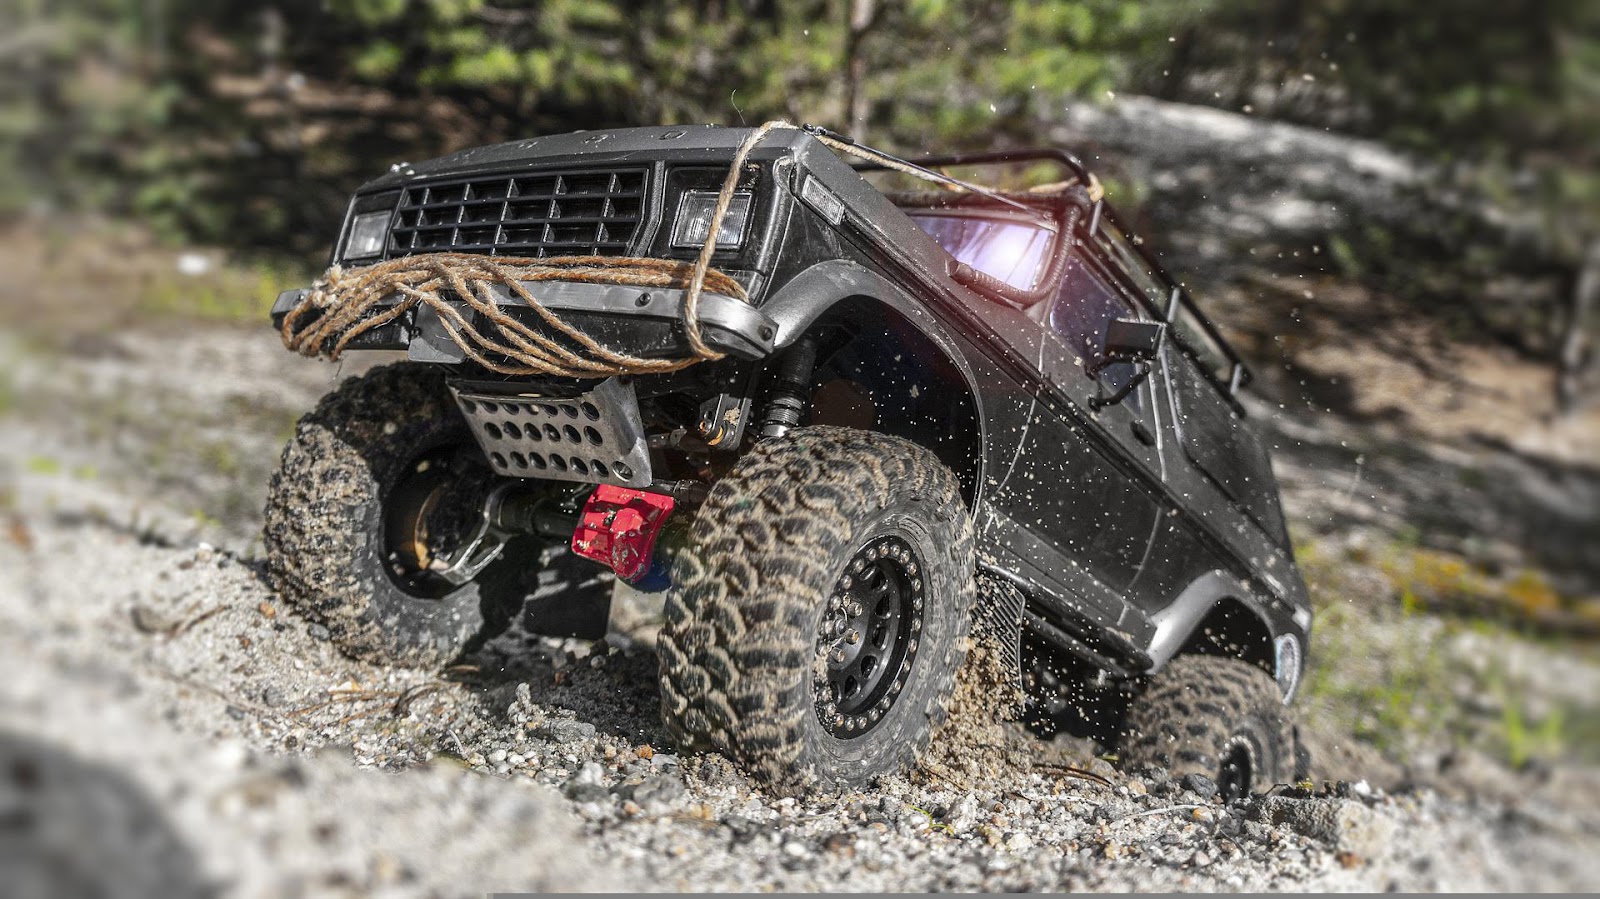 A picture of a Bronco offroading with a bunch of accessories on it similar to the ones sold by MbenzGram.